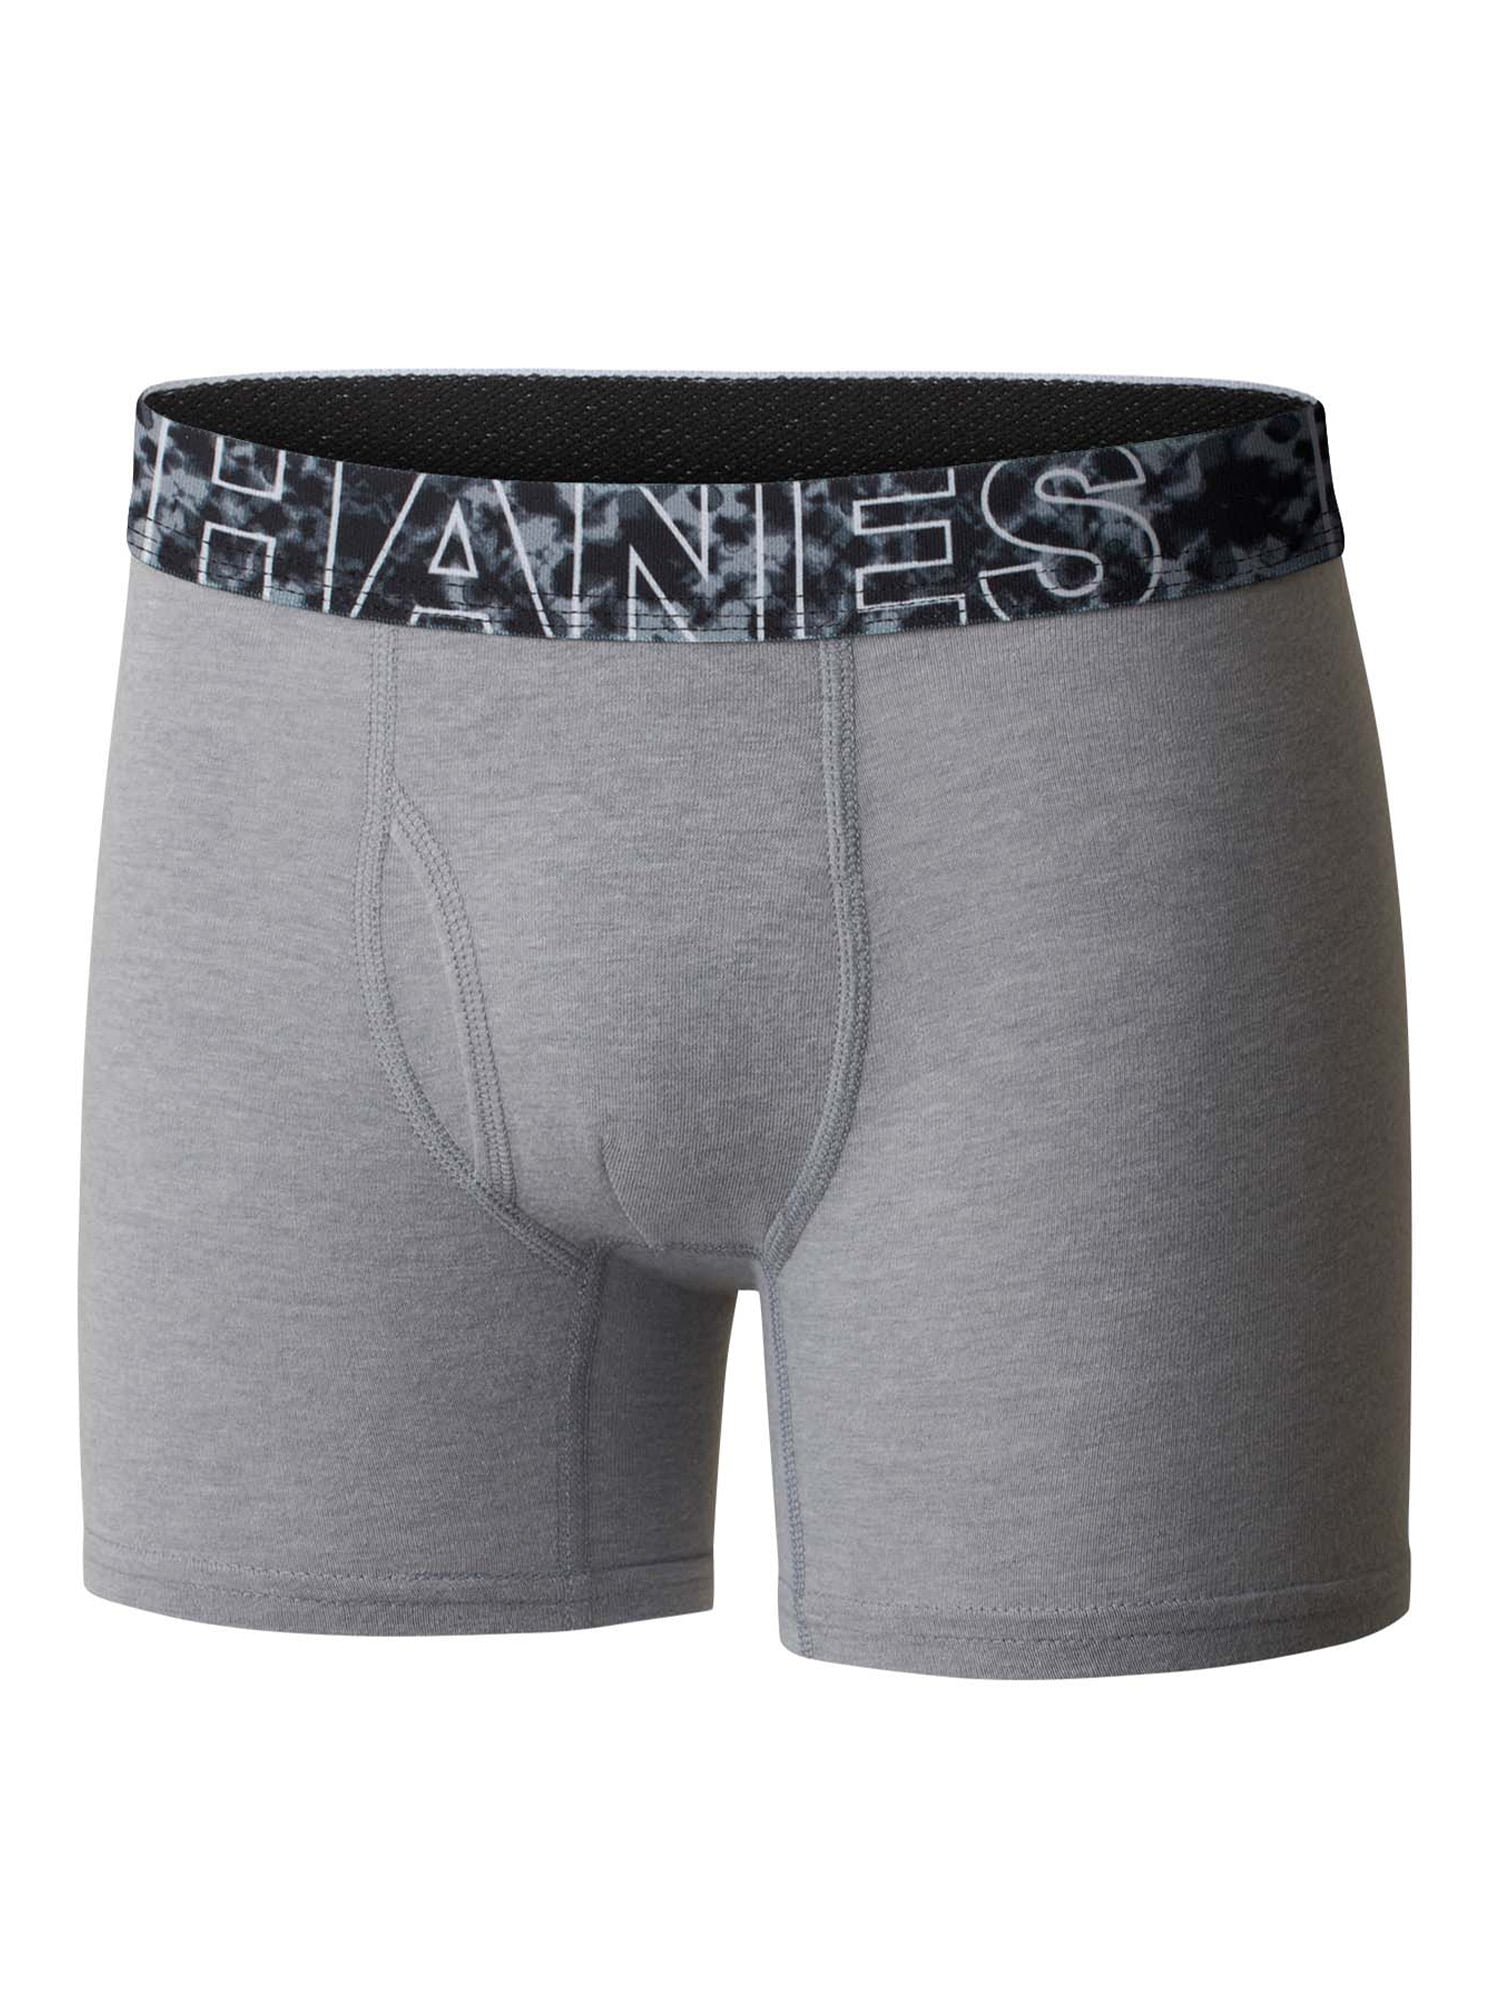 Comfortable Cotton Boxer Hanes Boyfriend Boxer Briefs For Boys Ideal For  Small And Mid Childrens Underwear X0829 From Fashion_official01, $7.21